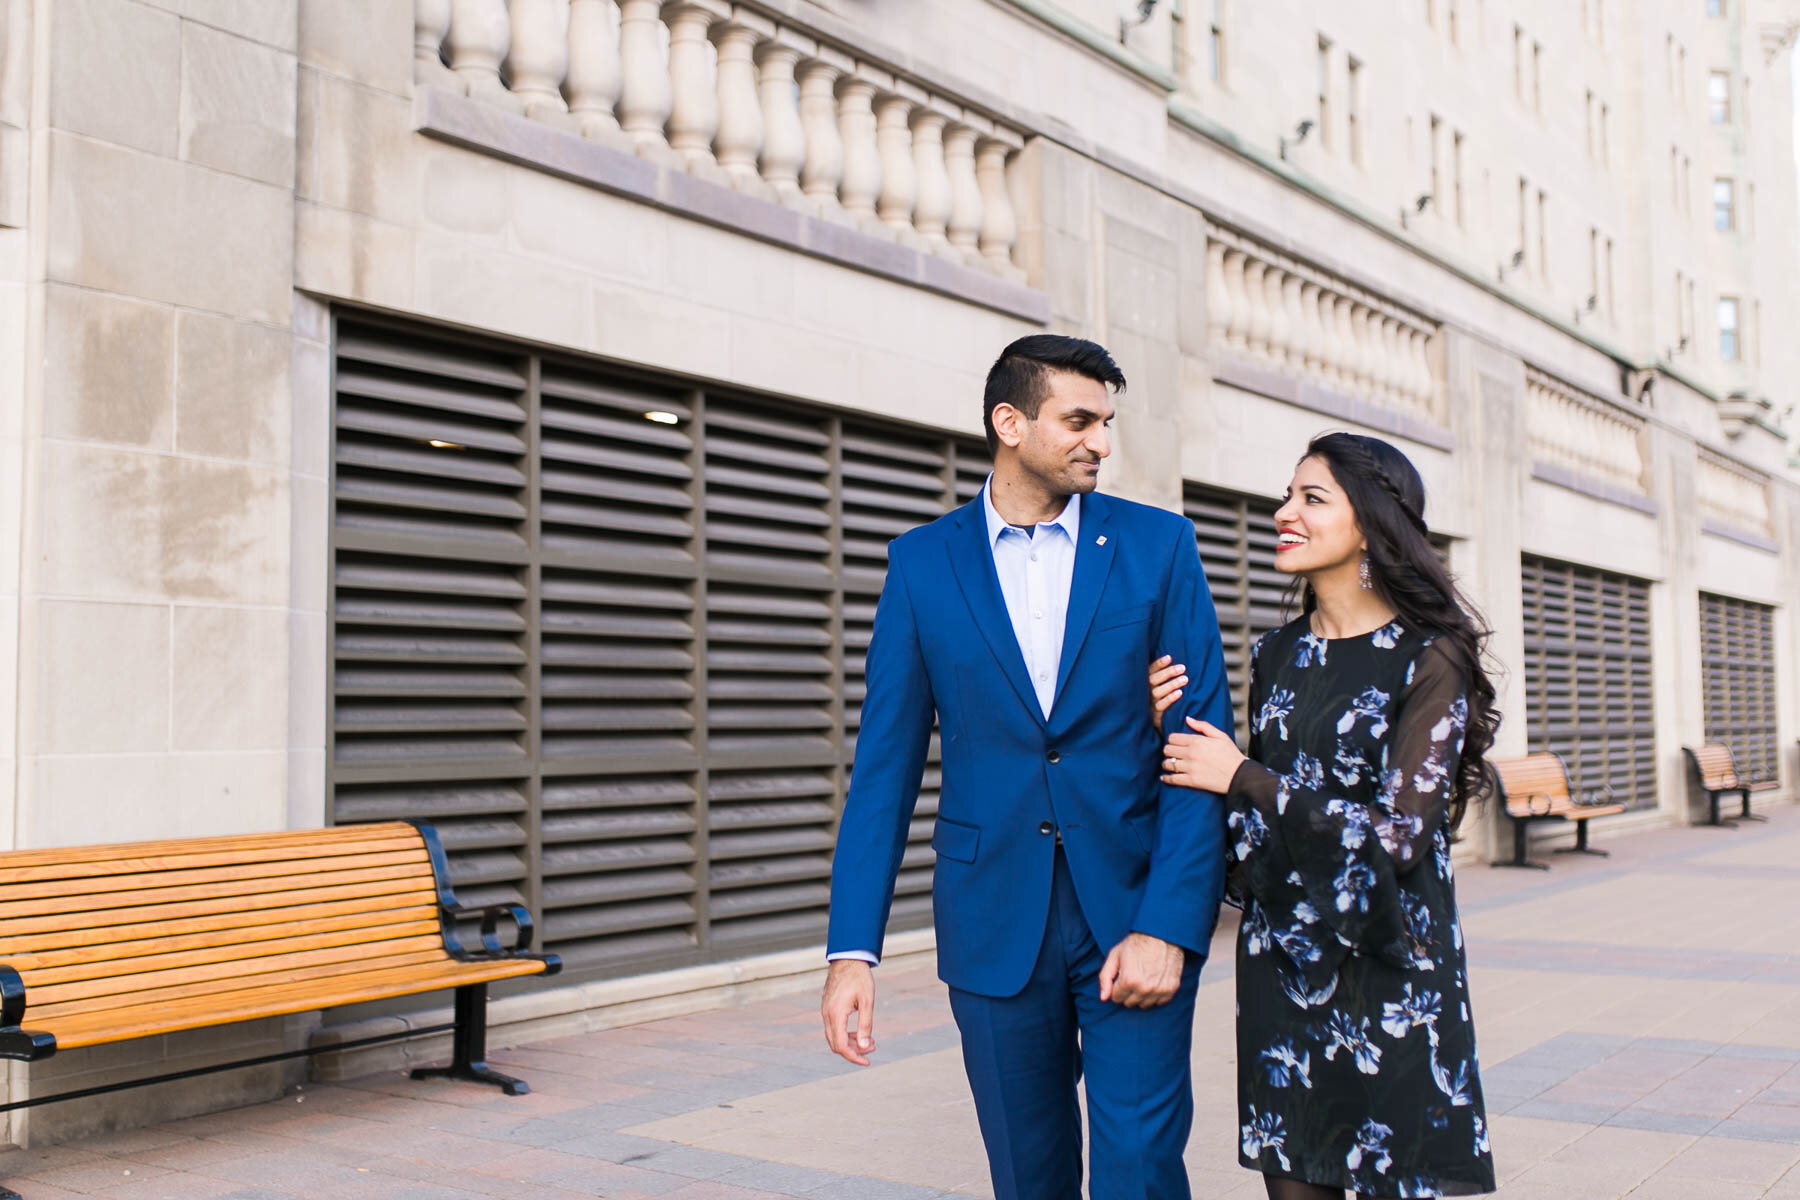 Engagement Photoshoot At Chateau Laurier &amp; Major’s Hill Park in Downtown Ottawa